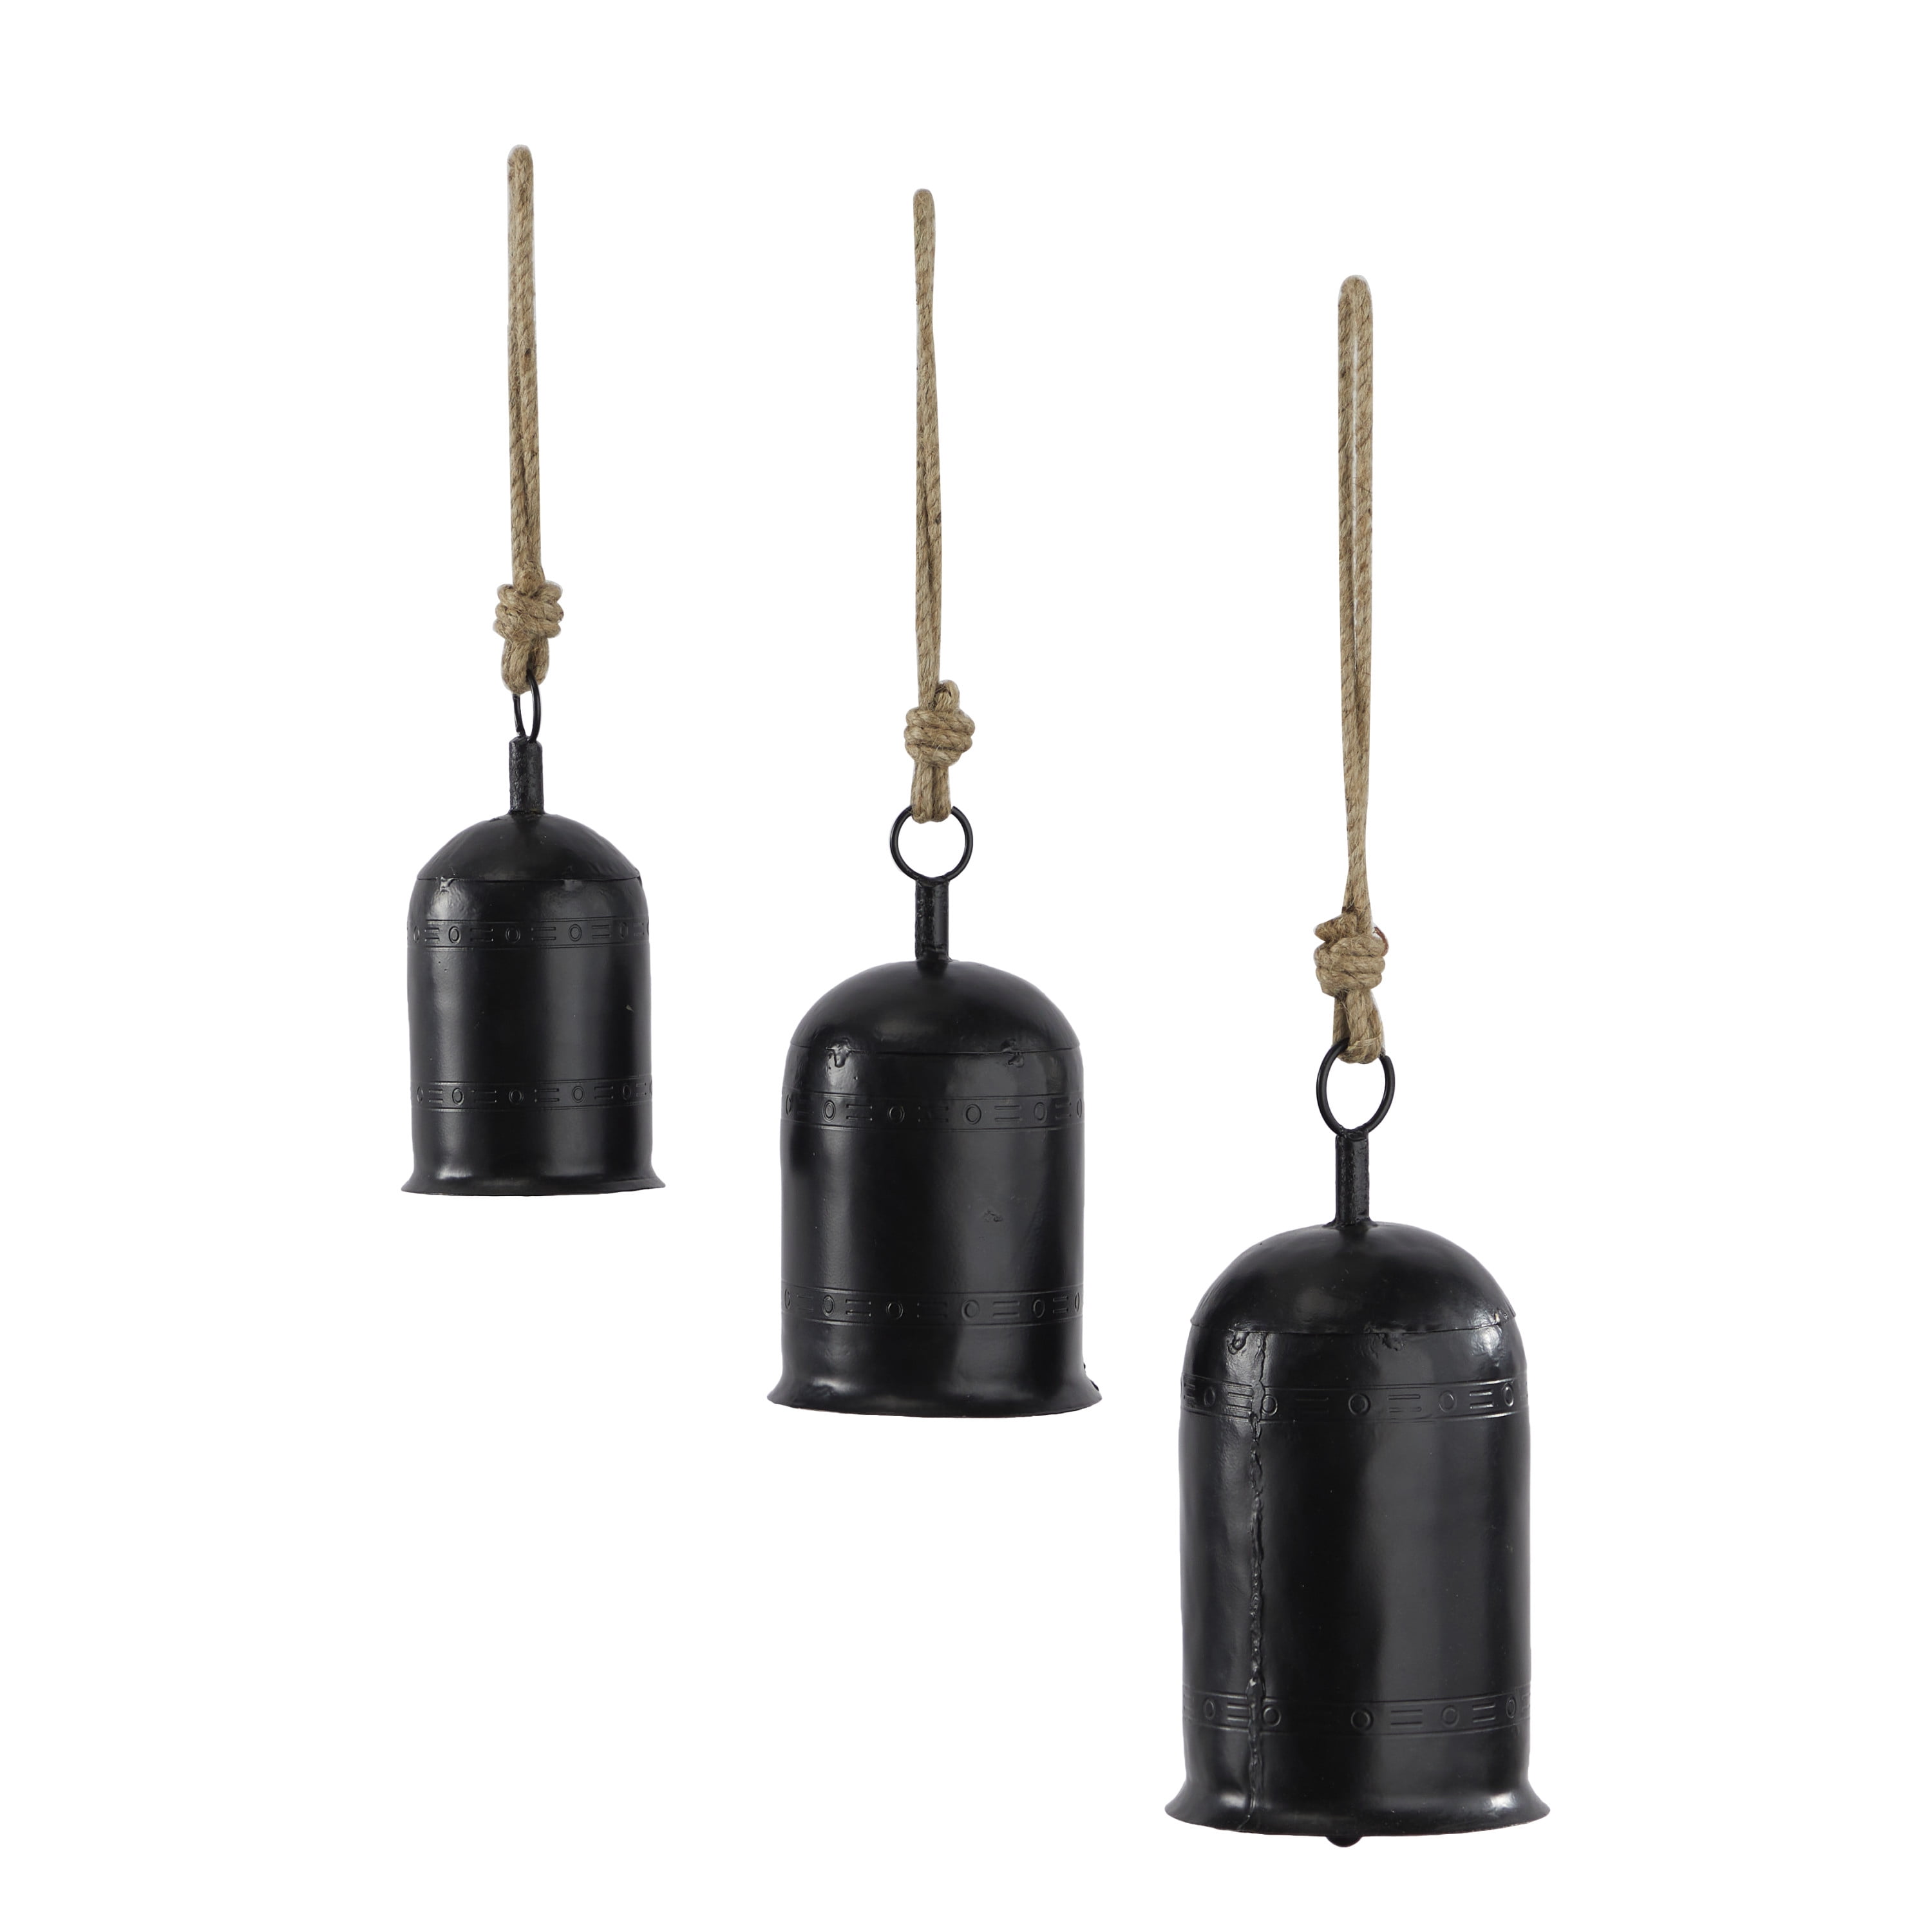 Decmode Tibetan Inspired Black Metal Cylindrical Decorative Cow Bells with Jute Hanging Rope, 3 Count, Size: 5.00 inch x 5.00 inch x 10.00 inchh